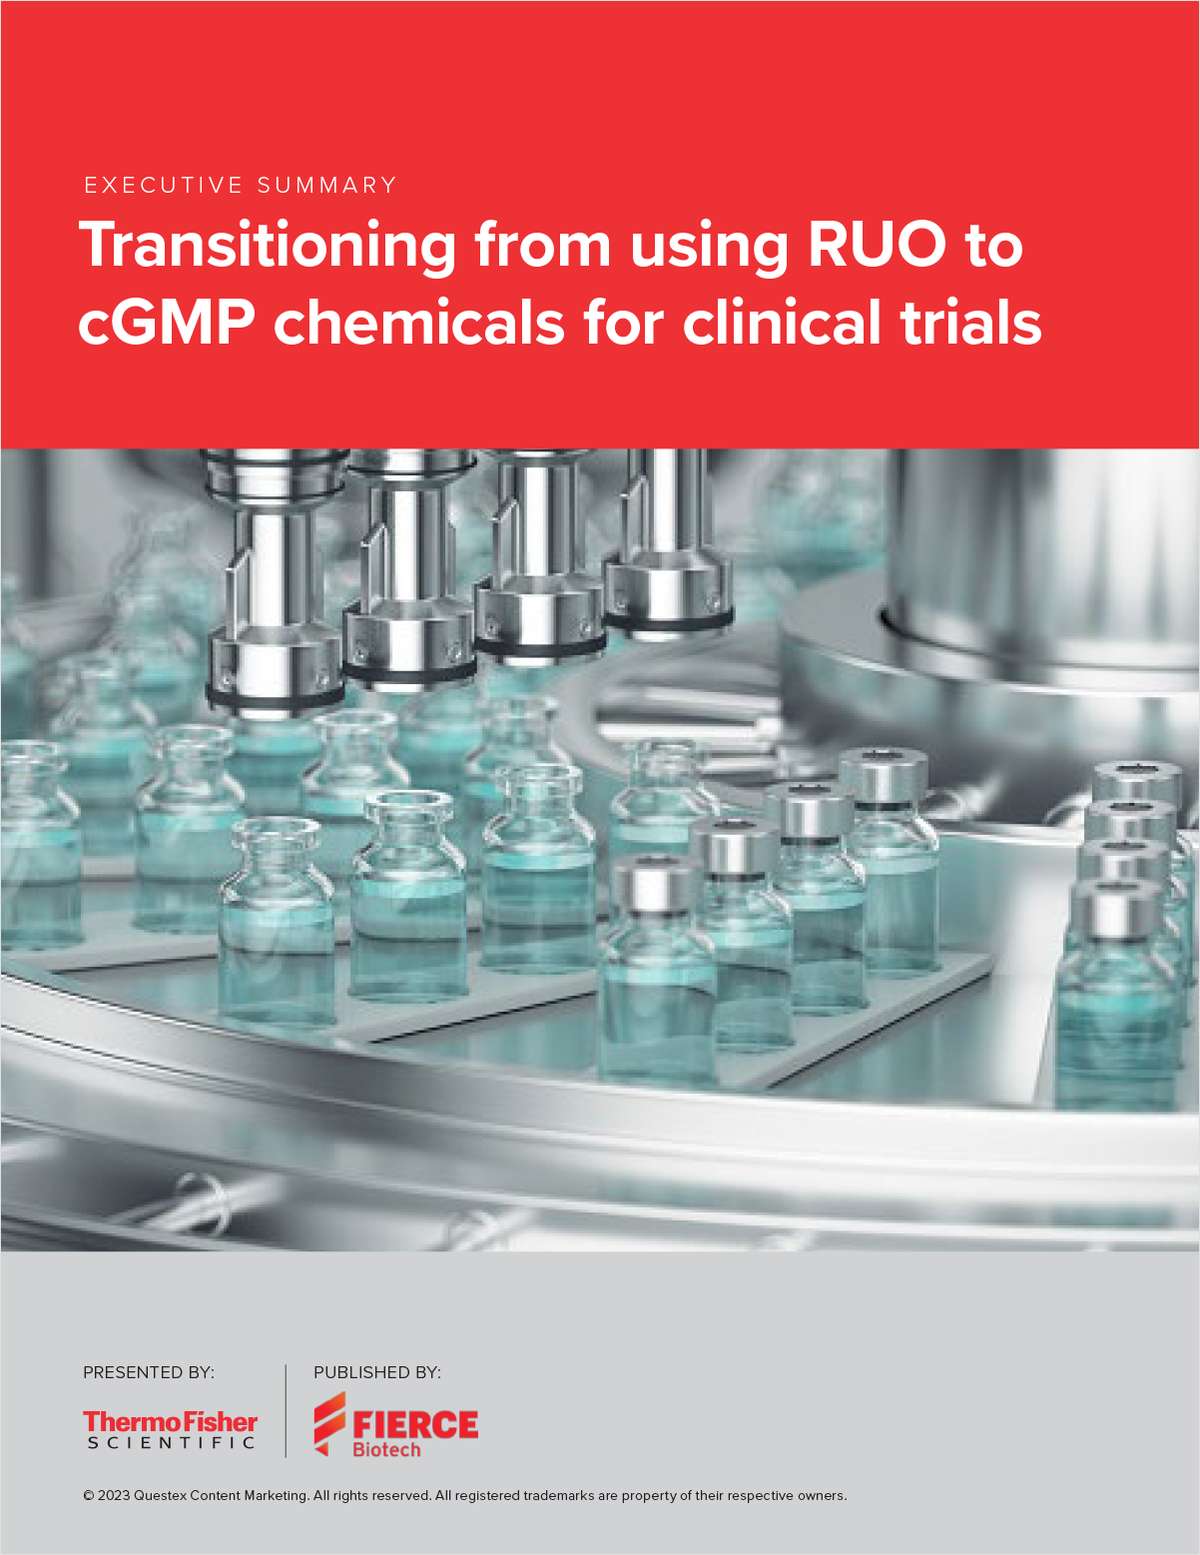 Transitioning from RUO to CGMP for clinical trials